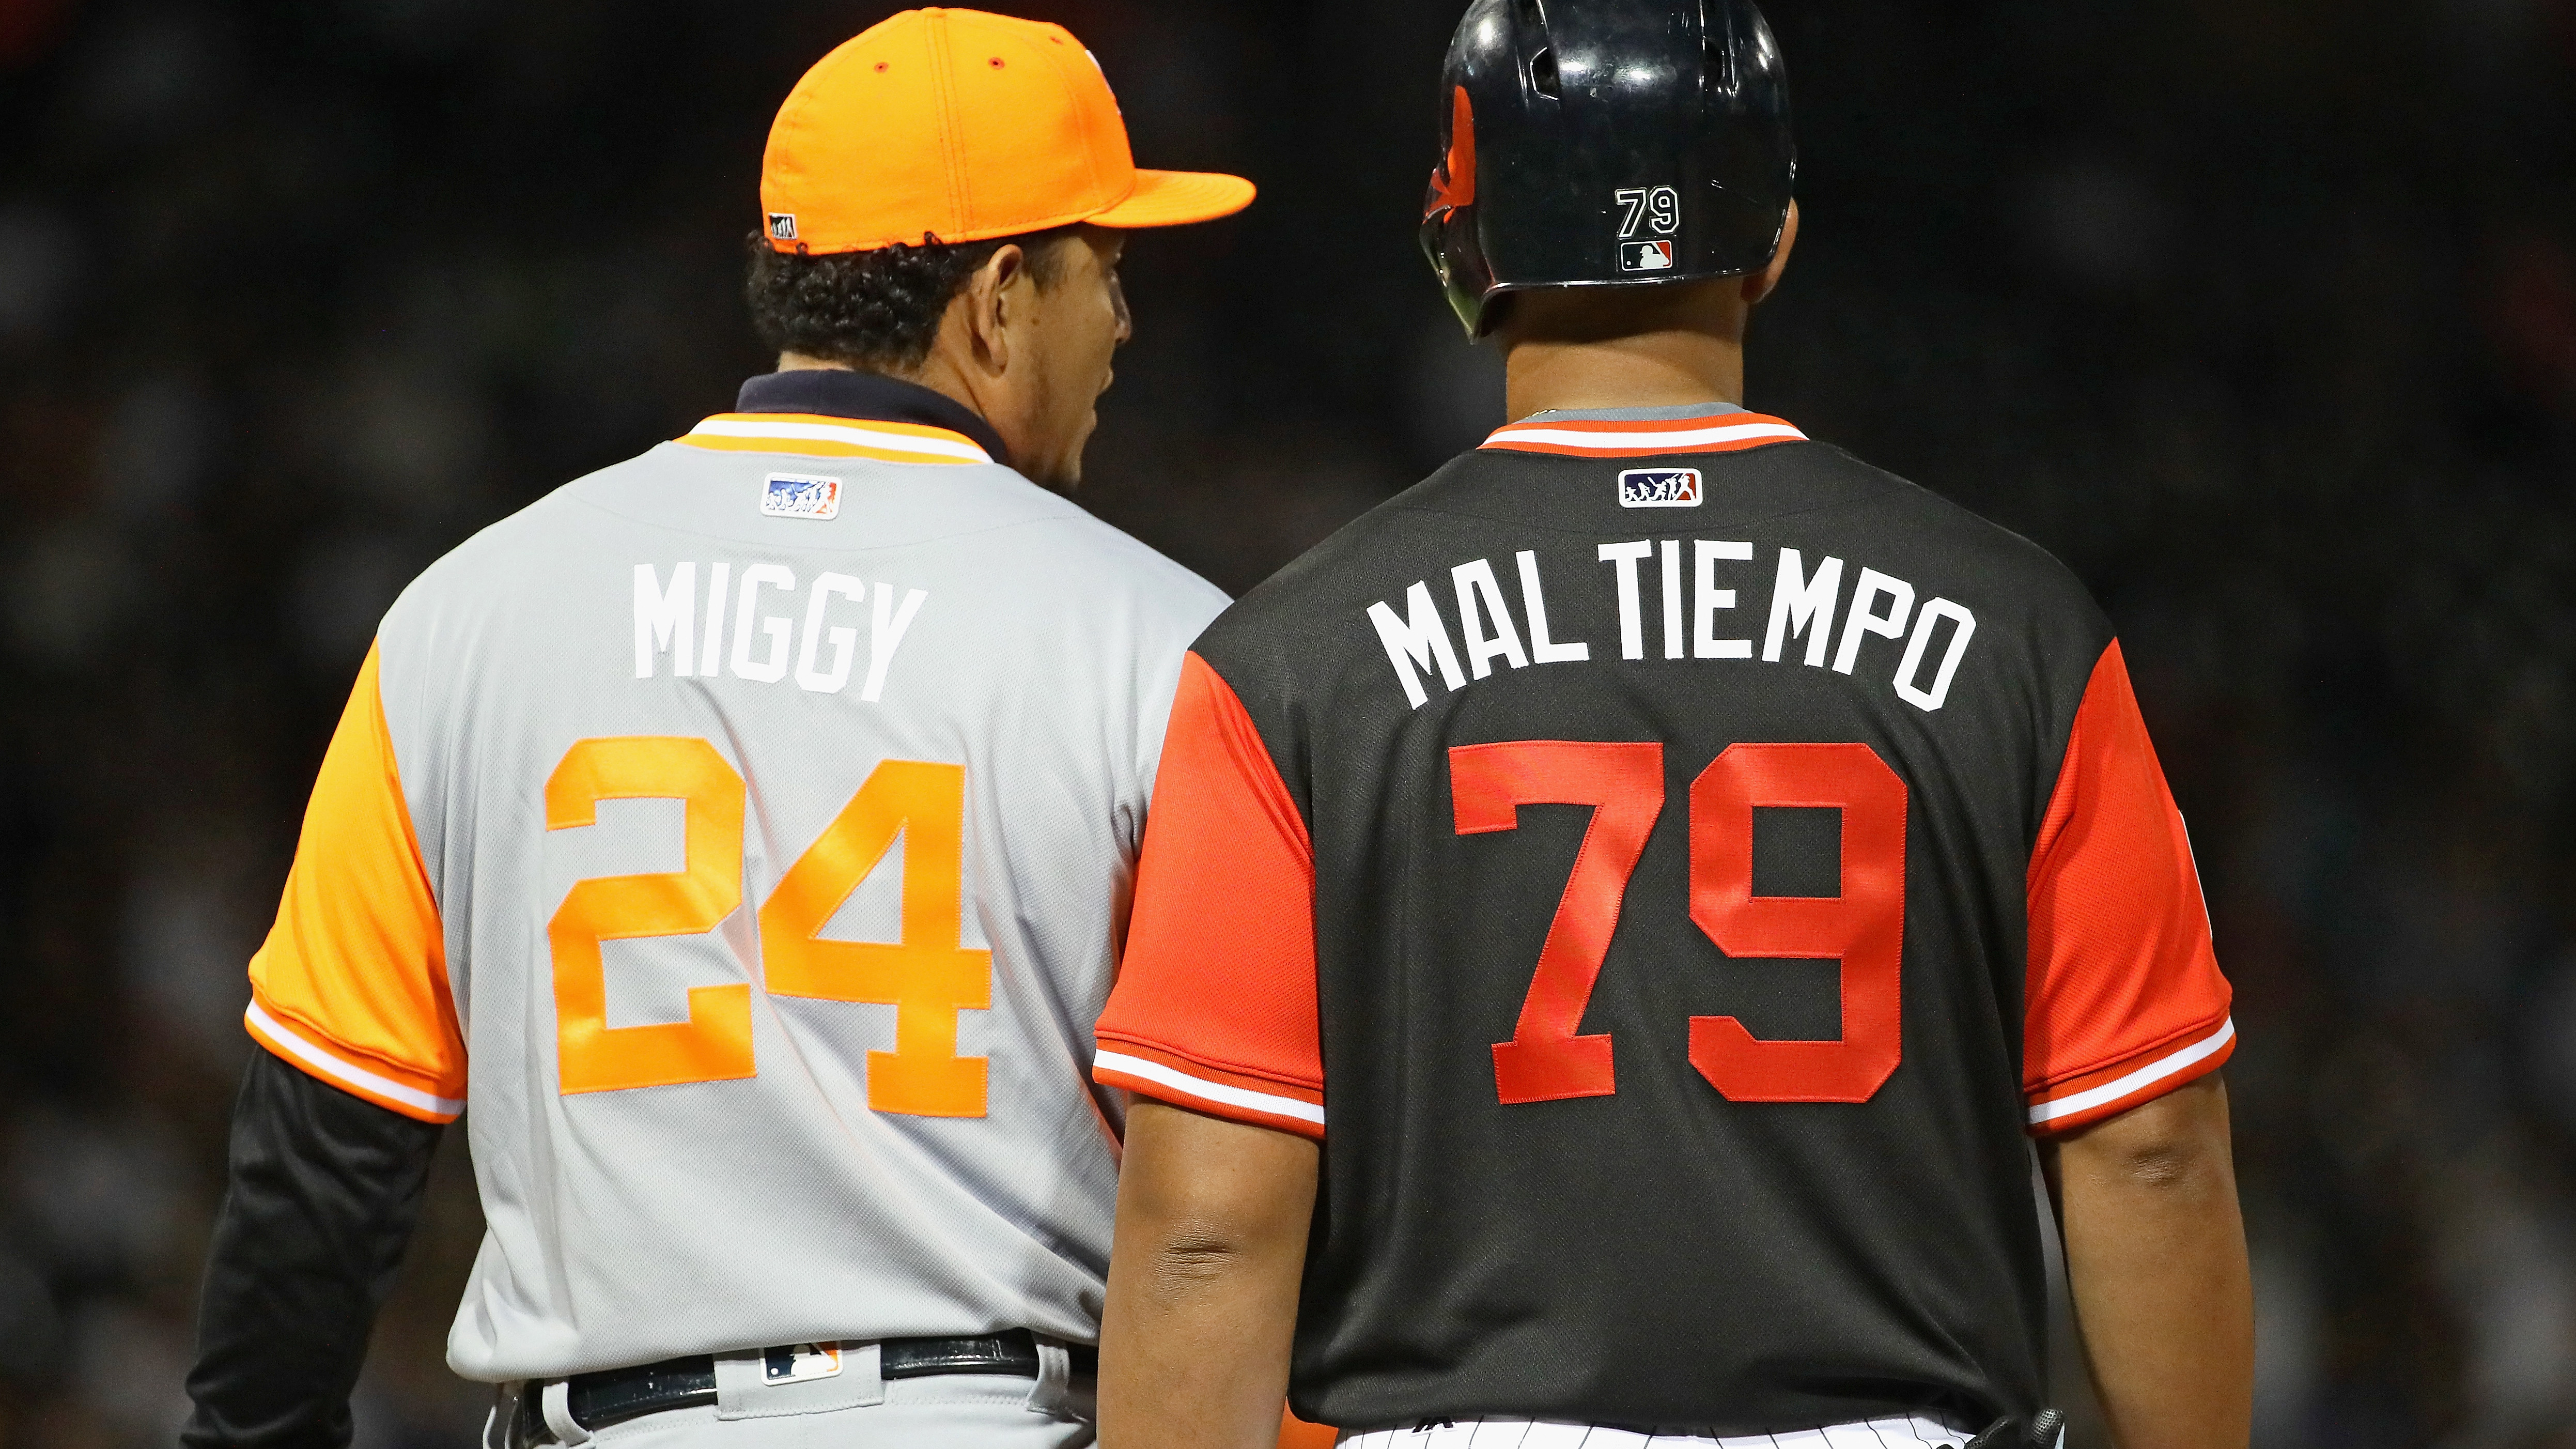 Cool nicknames and looks from baseball's Players Weekend